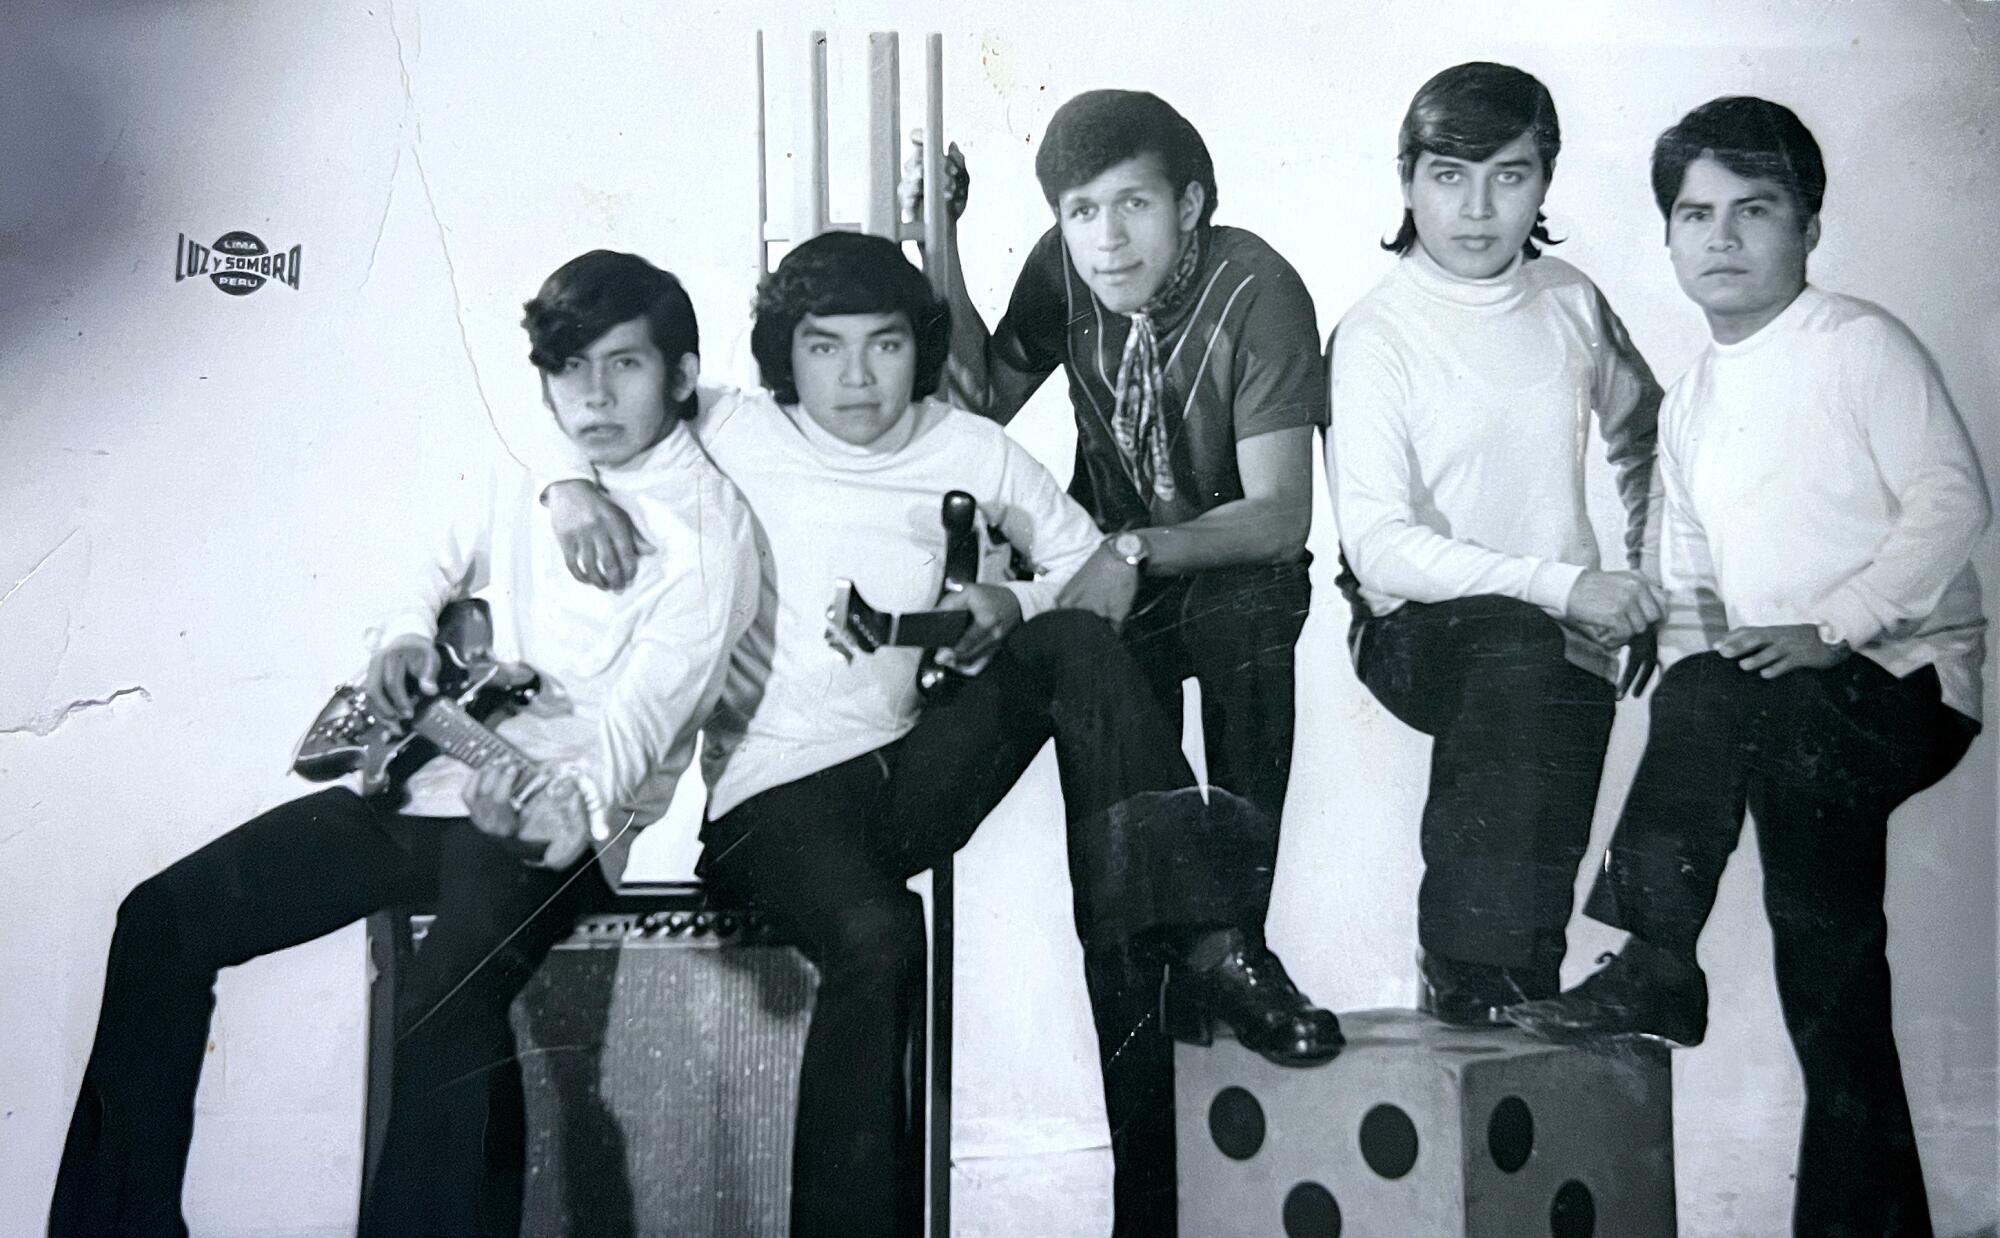 Black and white photo of five men